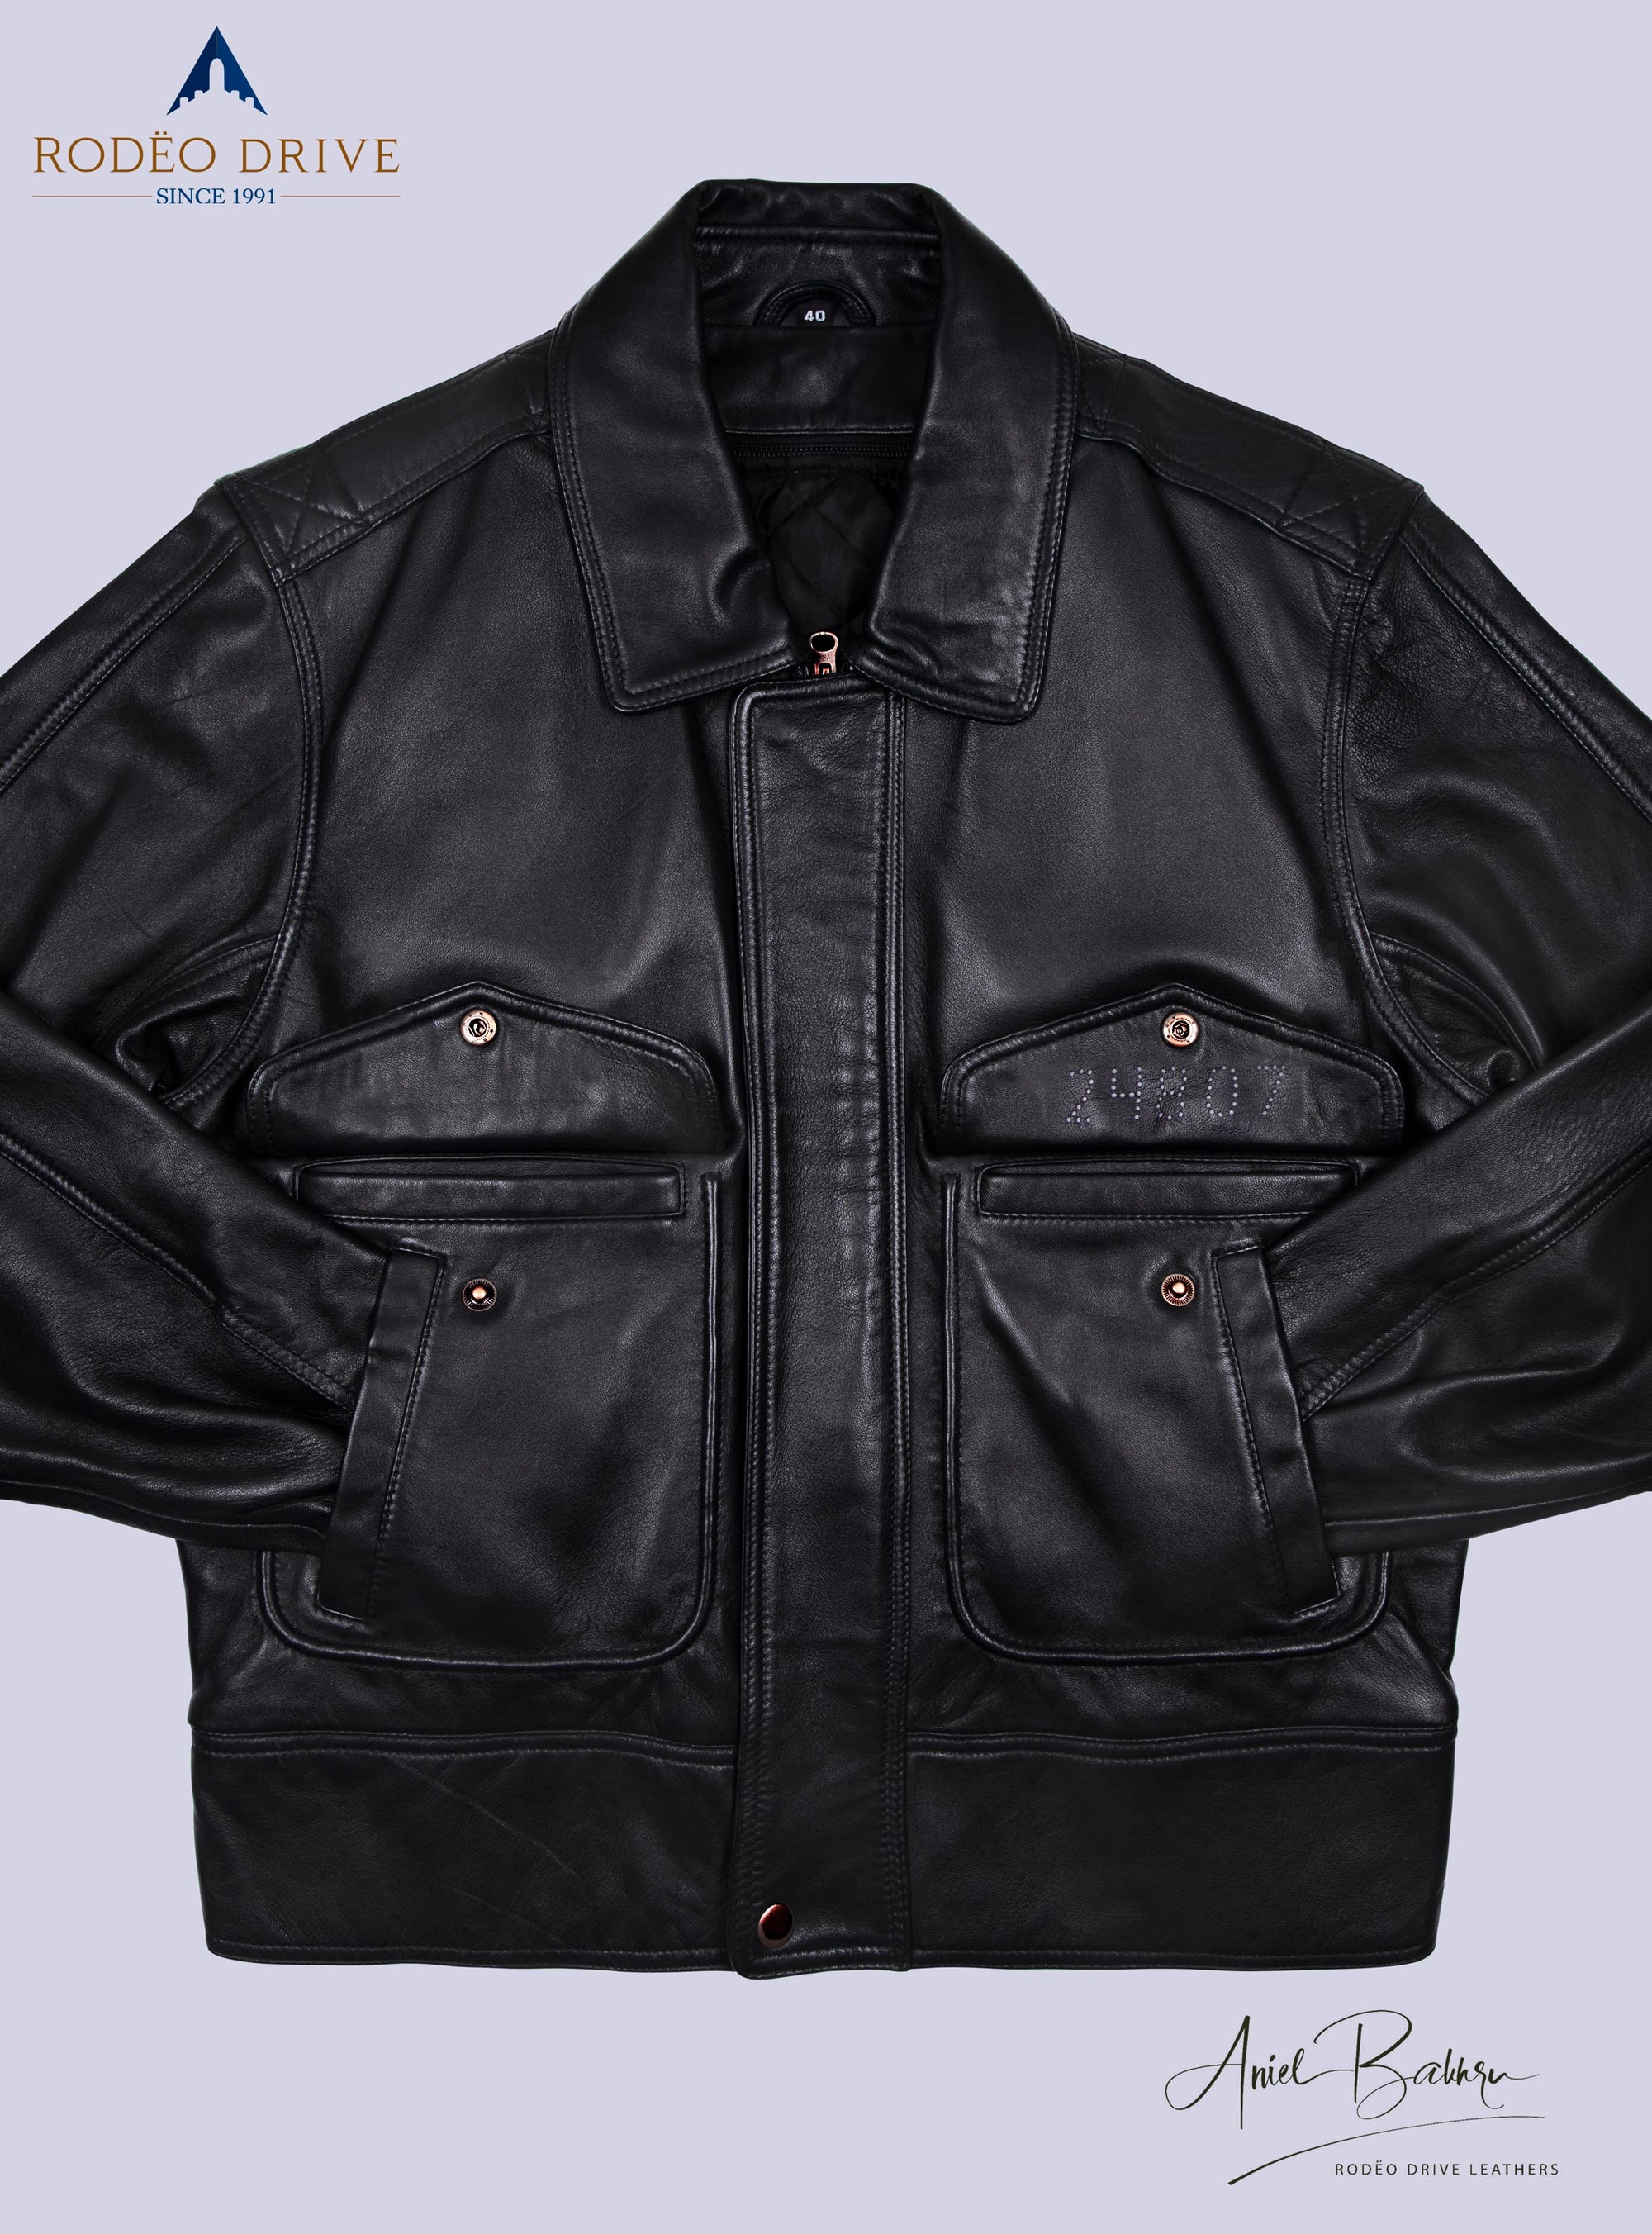 Front complete image of black BOMBER JACKET . The hands of jacket are tucked inside slit pockets. remaining two  pockets are buttoned